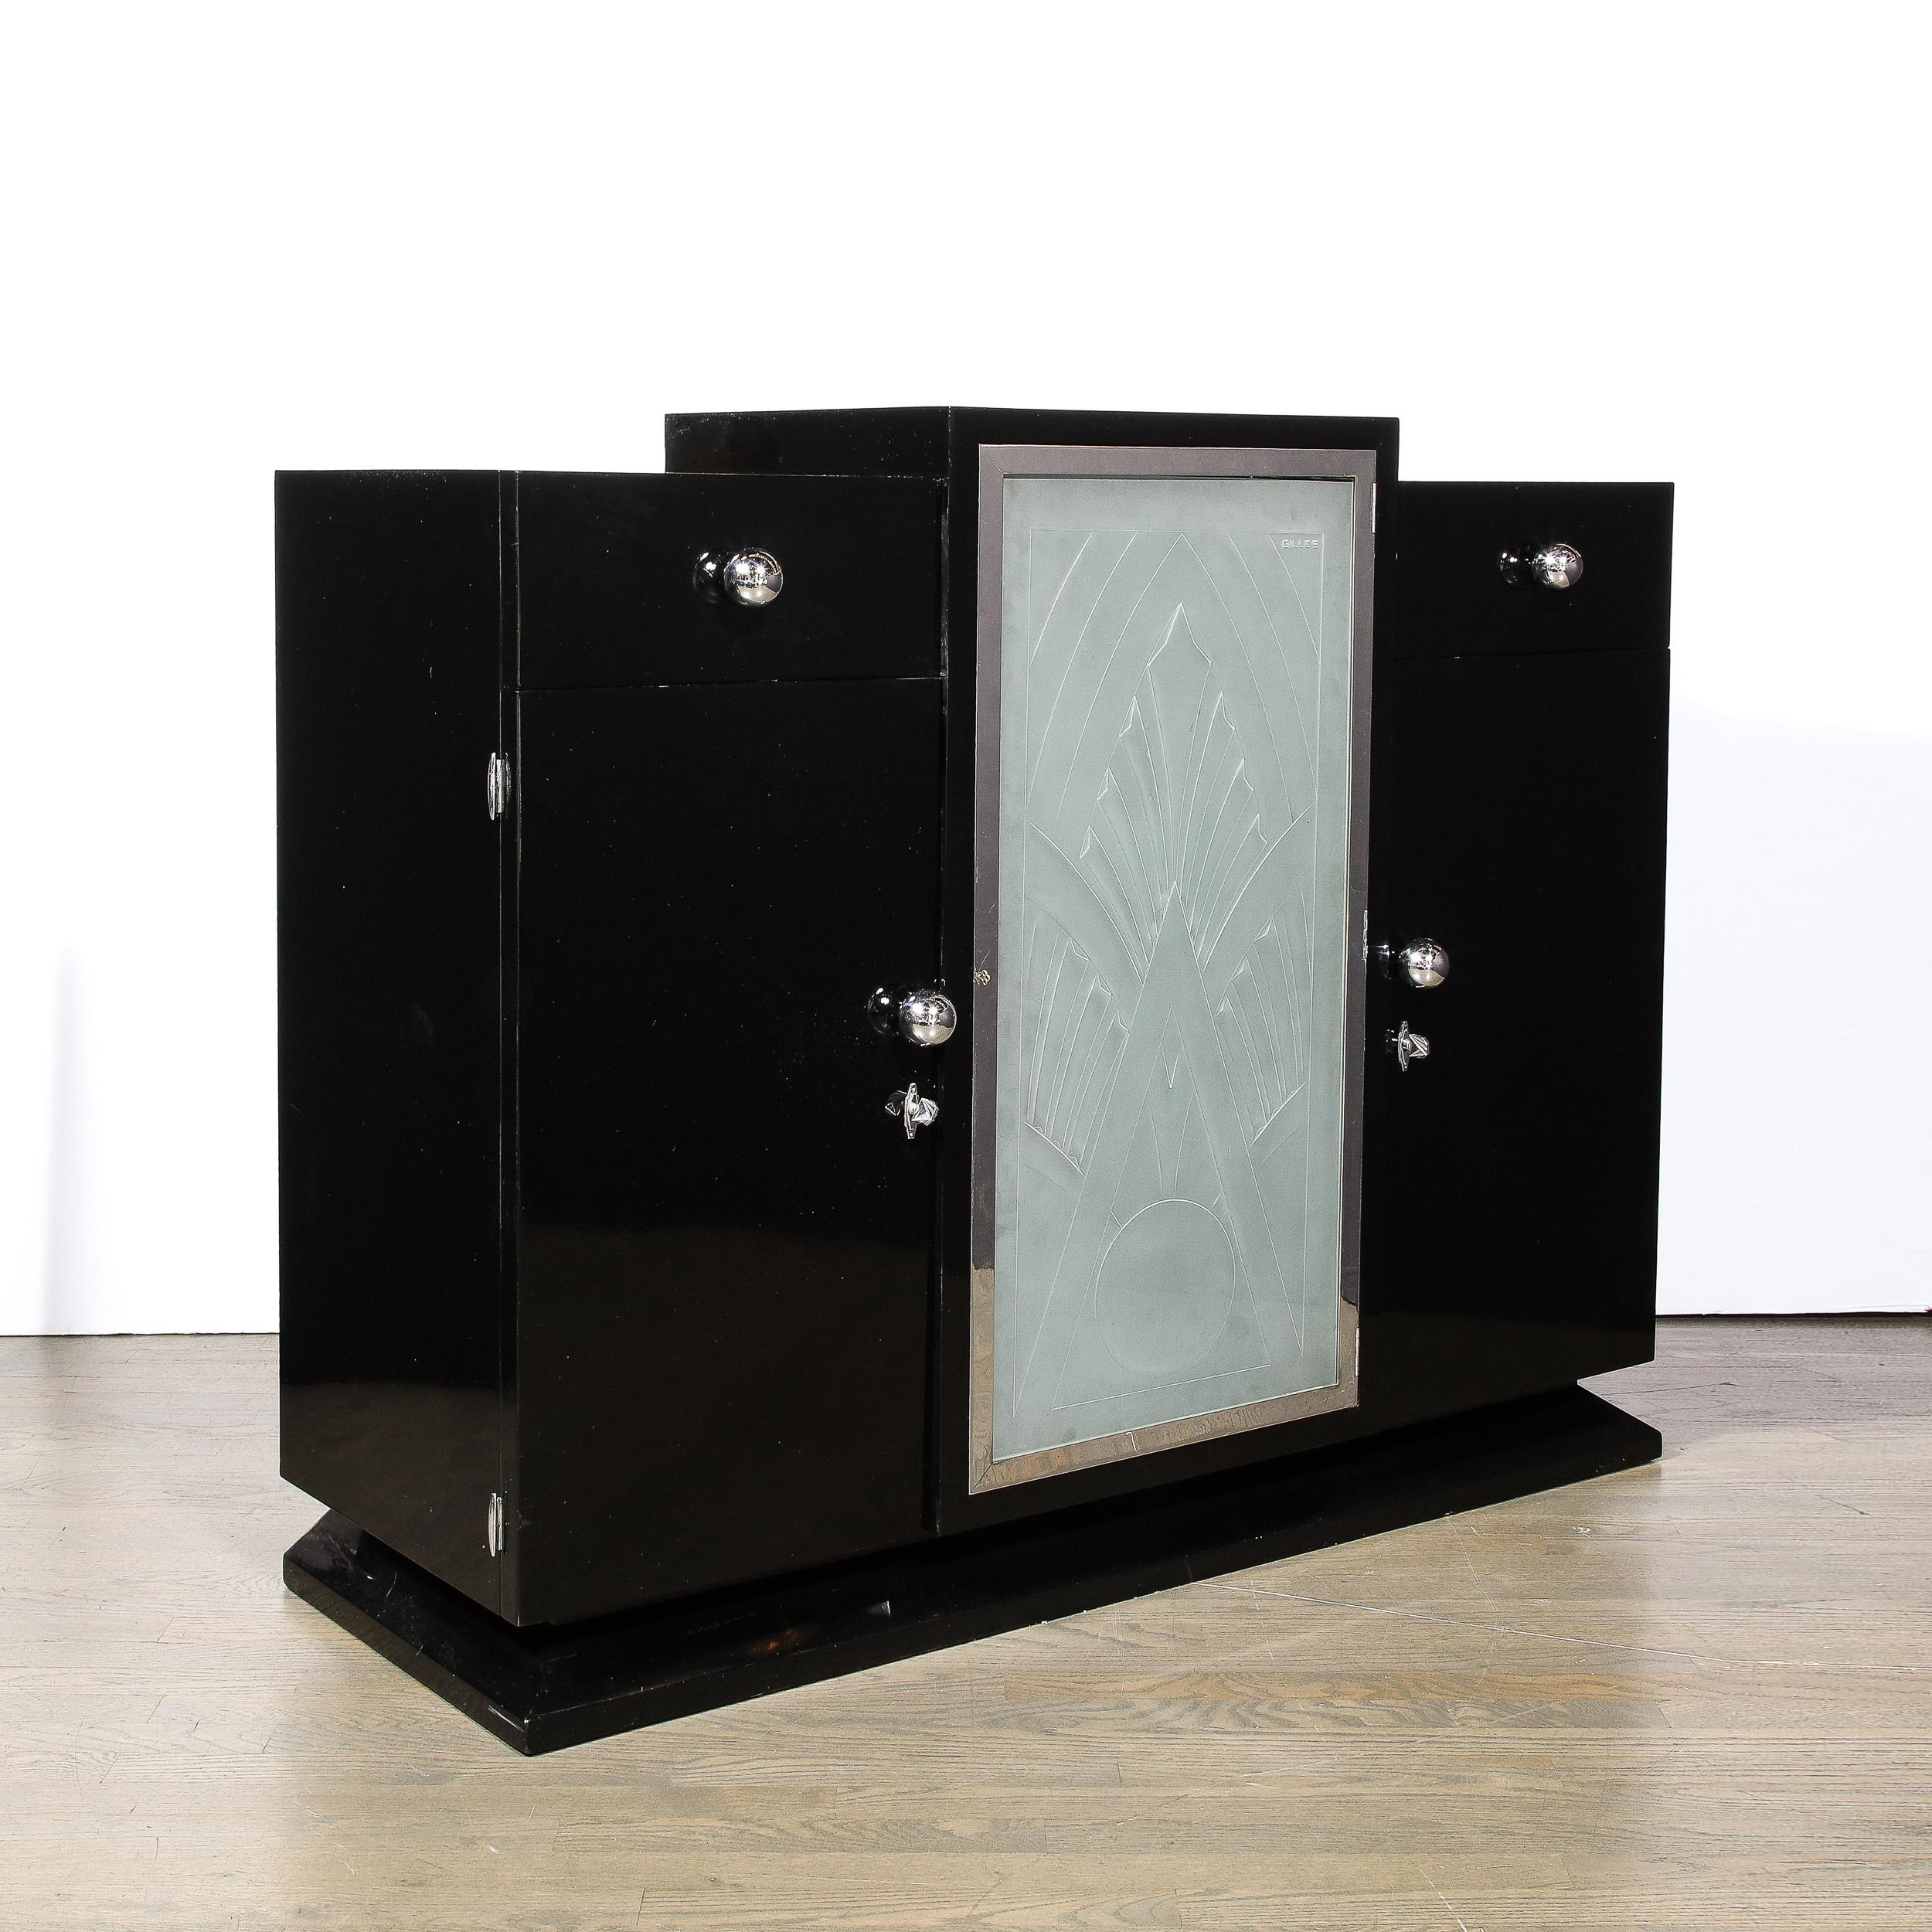 -This Stunning Art Deco Cabinet in Black Lacquer and relief Frosted Glass is created by the esteemed designer and metalworker Pierre Gilles and originates from France, Circa 1935. Featuring a beautiful front panel in molded and frosted glass